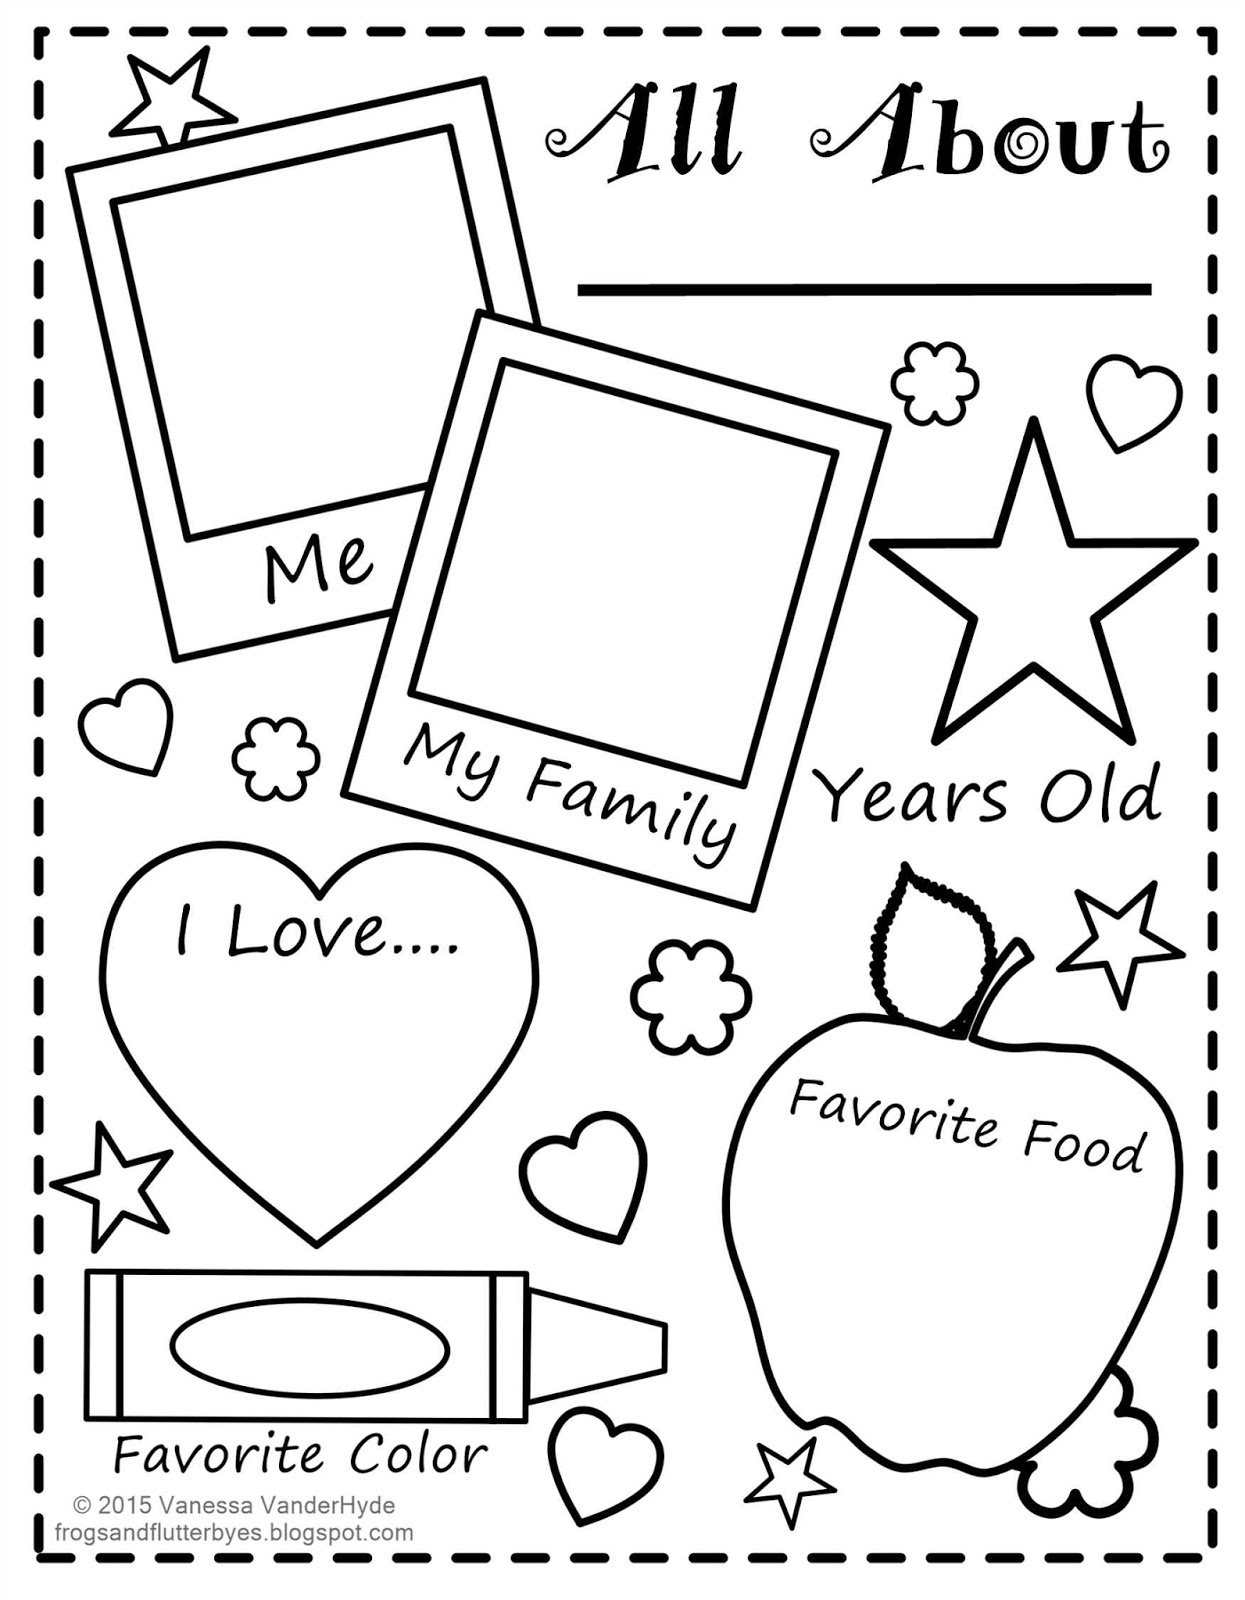 The Frogs And The Flutterbyes: All About Me Free Printable - All About Me Free Printable